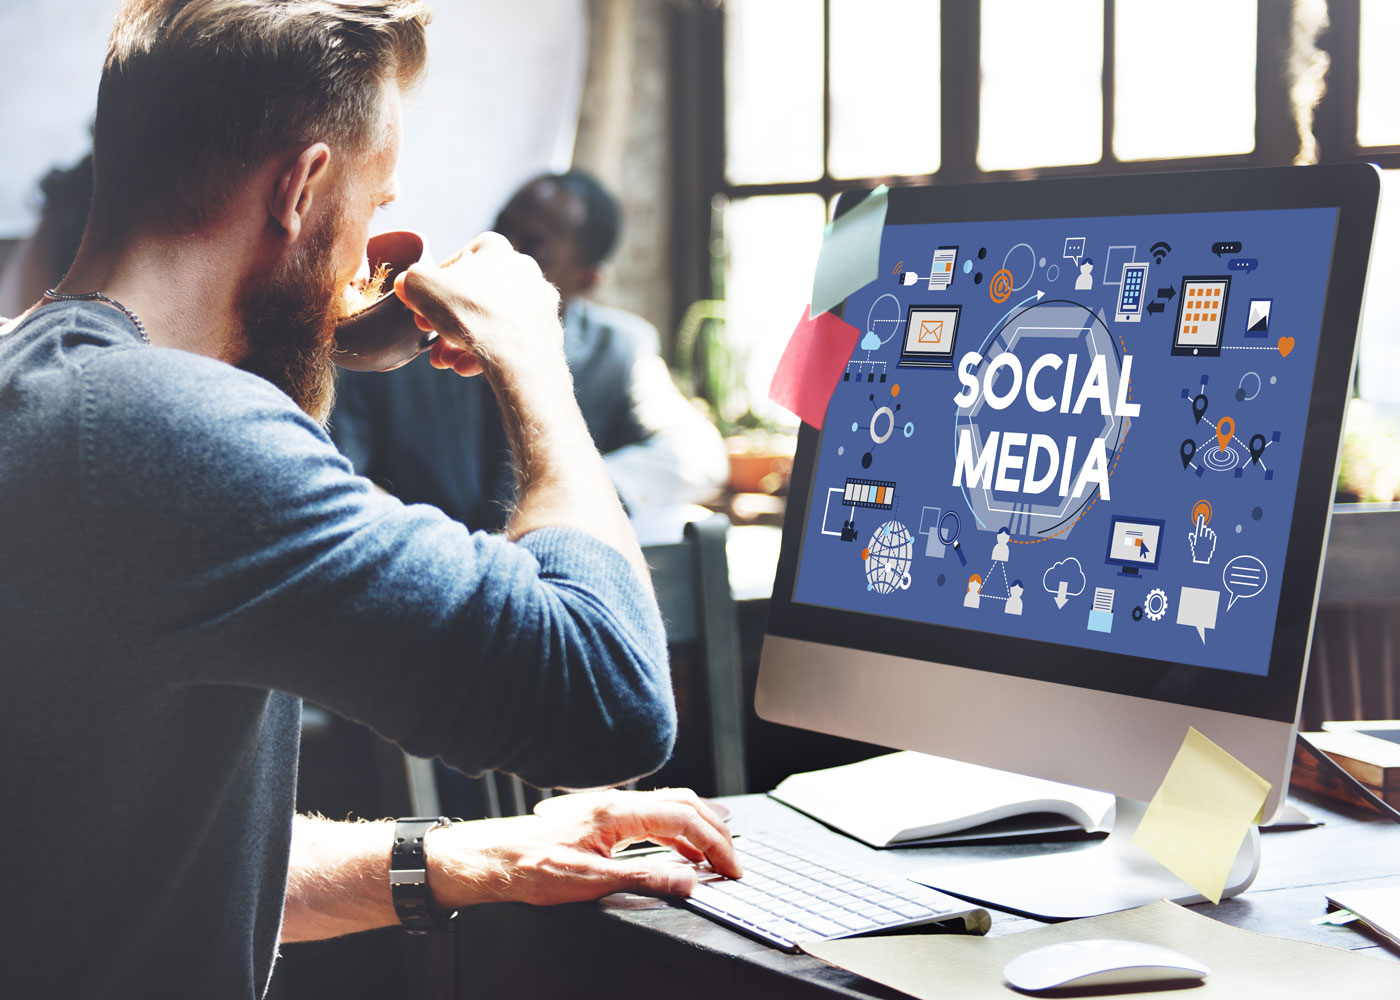 HARNESSING SOCIAL COMMUNICATIONS TECHNOLOGY TO IMPROVE THE WORKPLACE